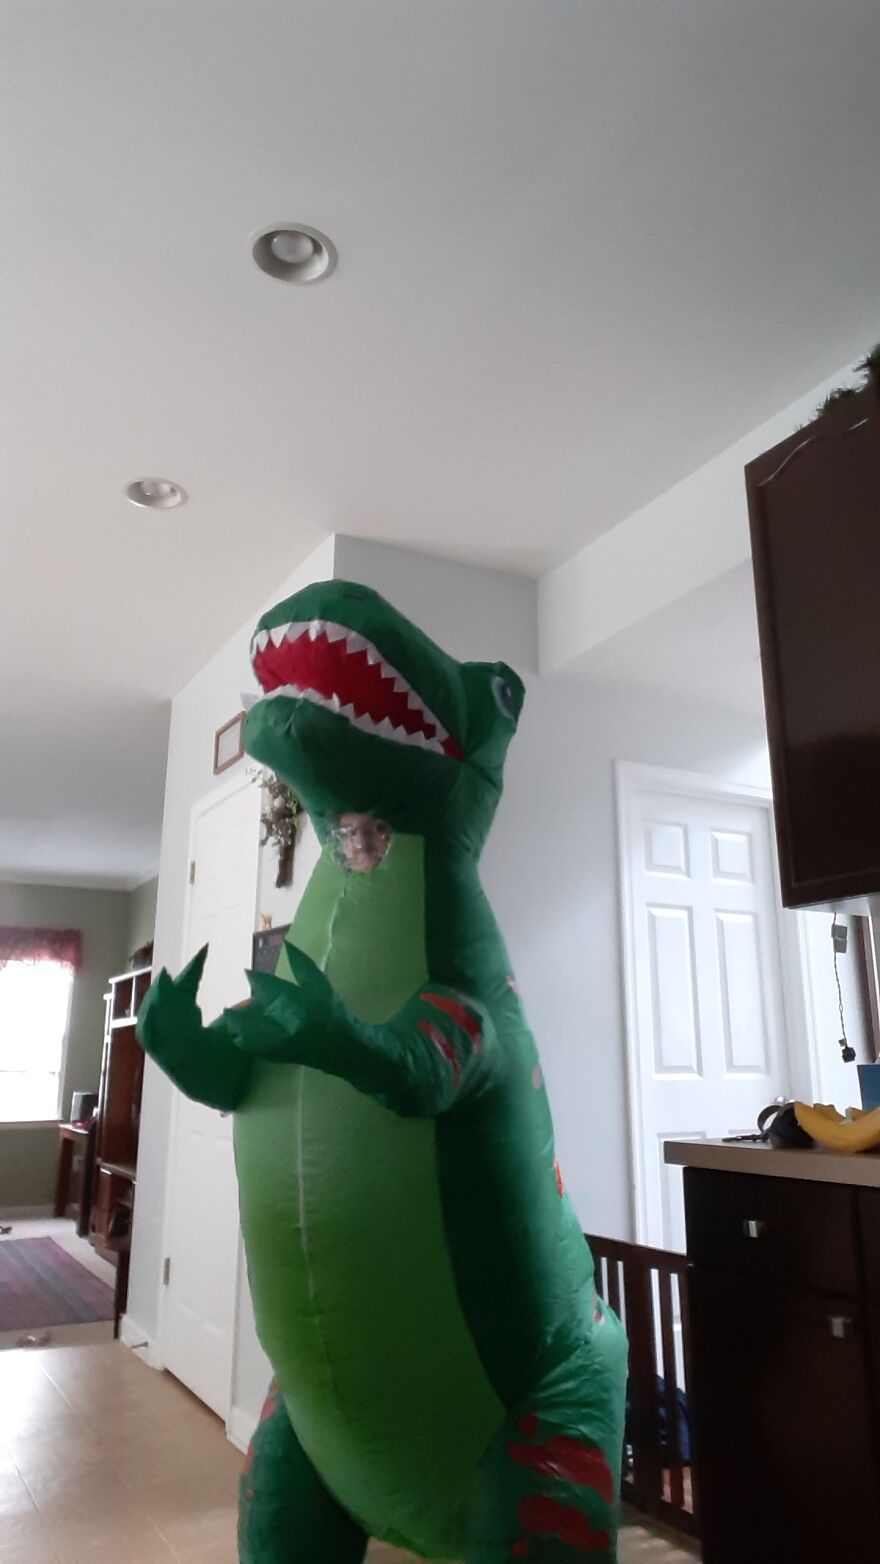 Everyone Else's Costumes On This Post Are All Like Super Cute And Intricate And I'm Literally An Inflatable Dino